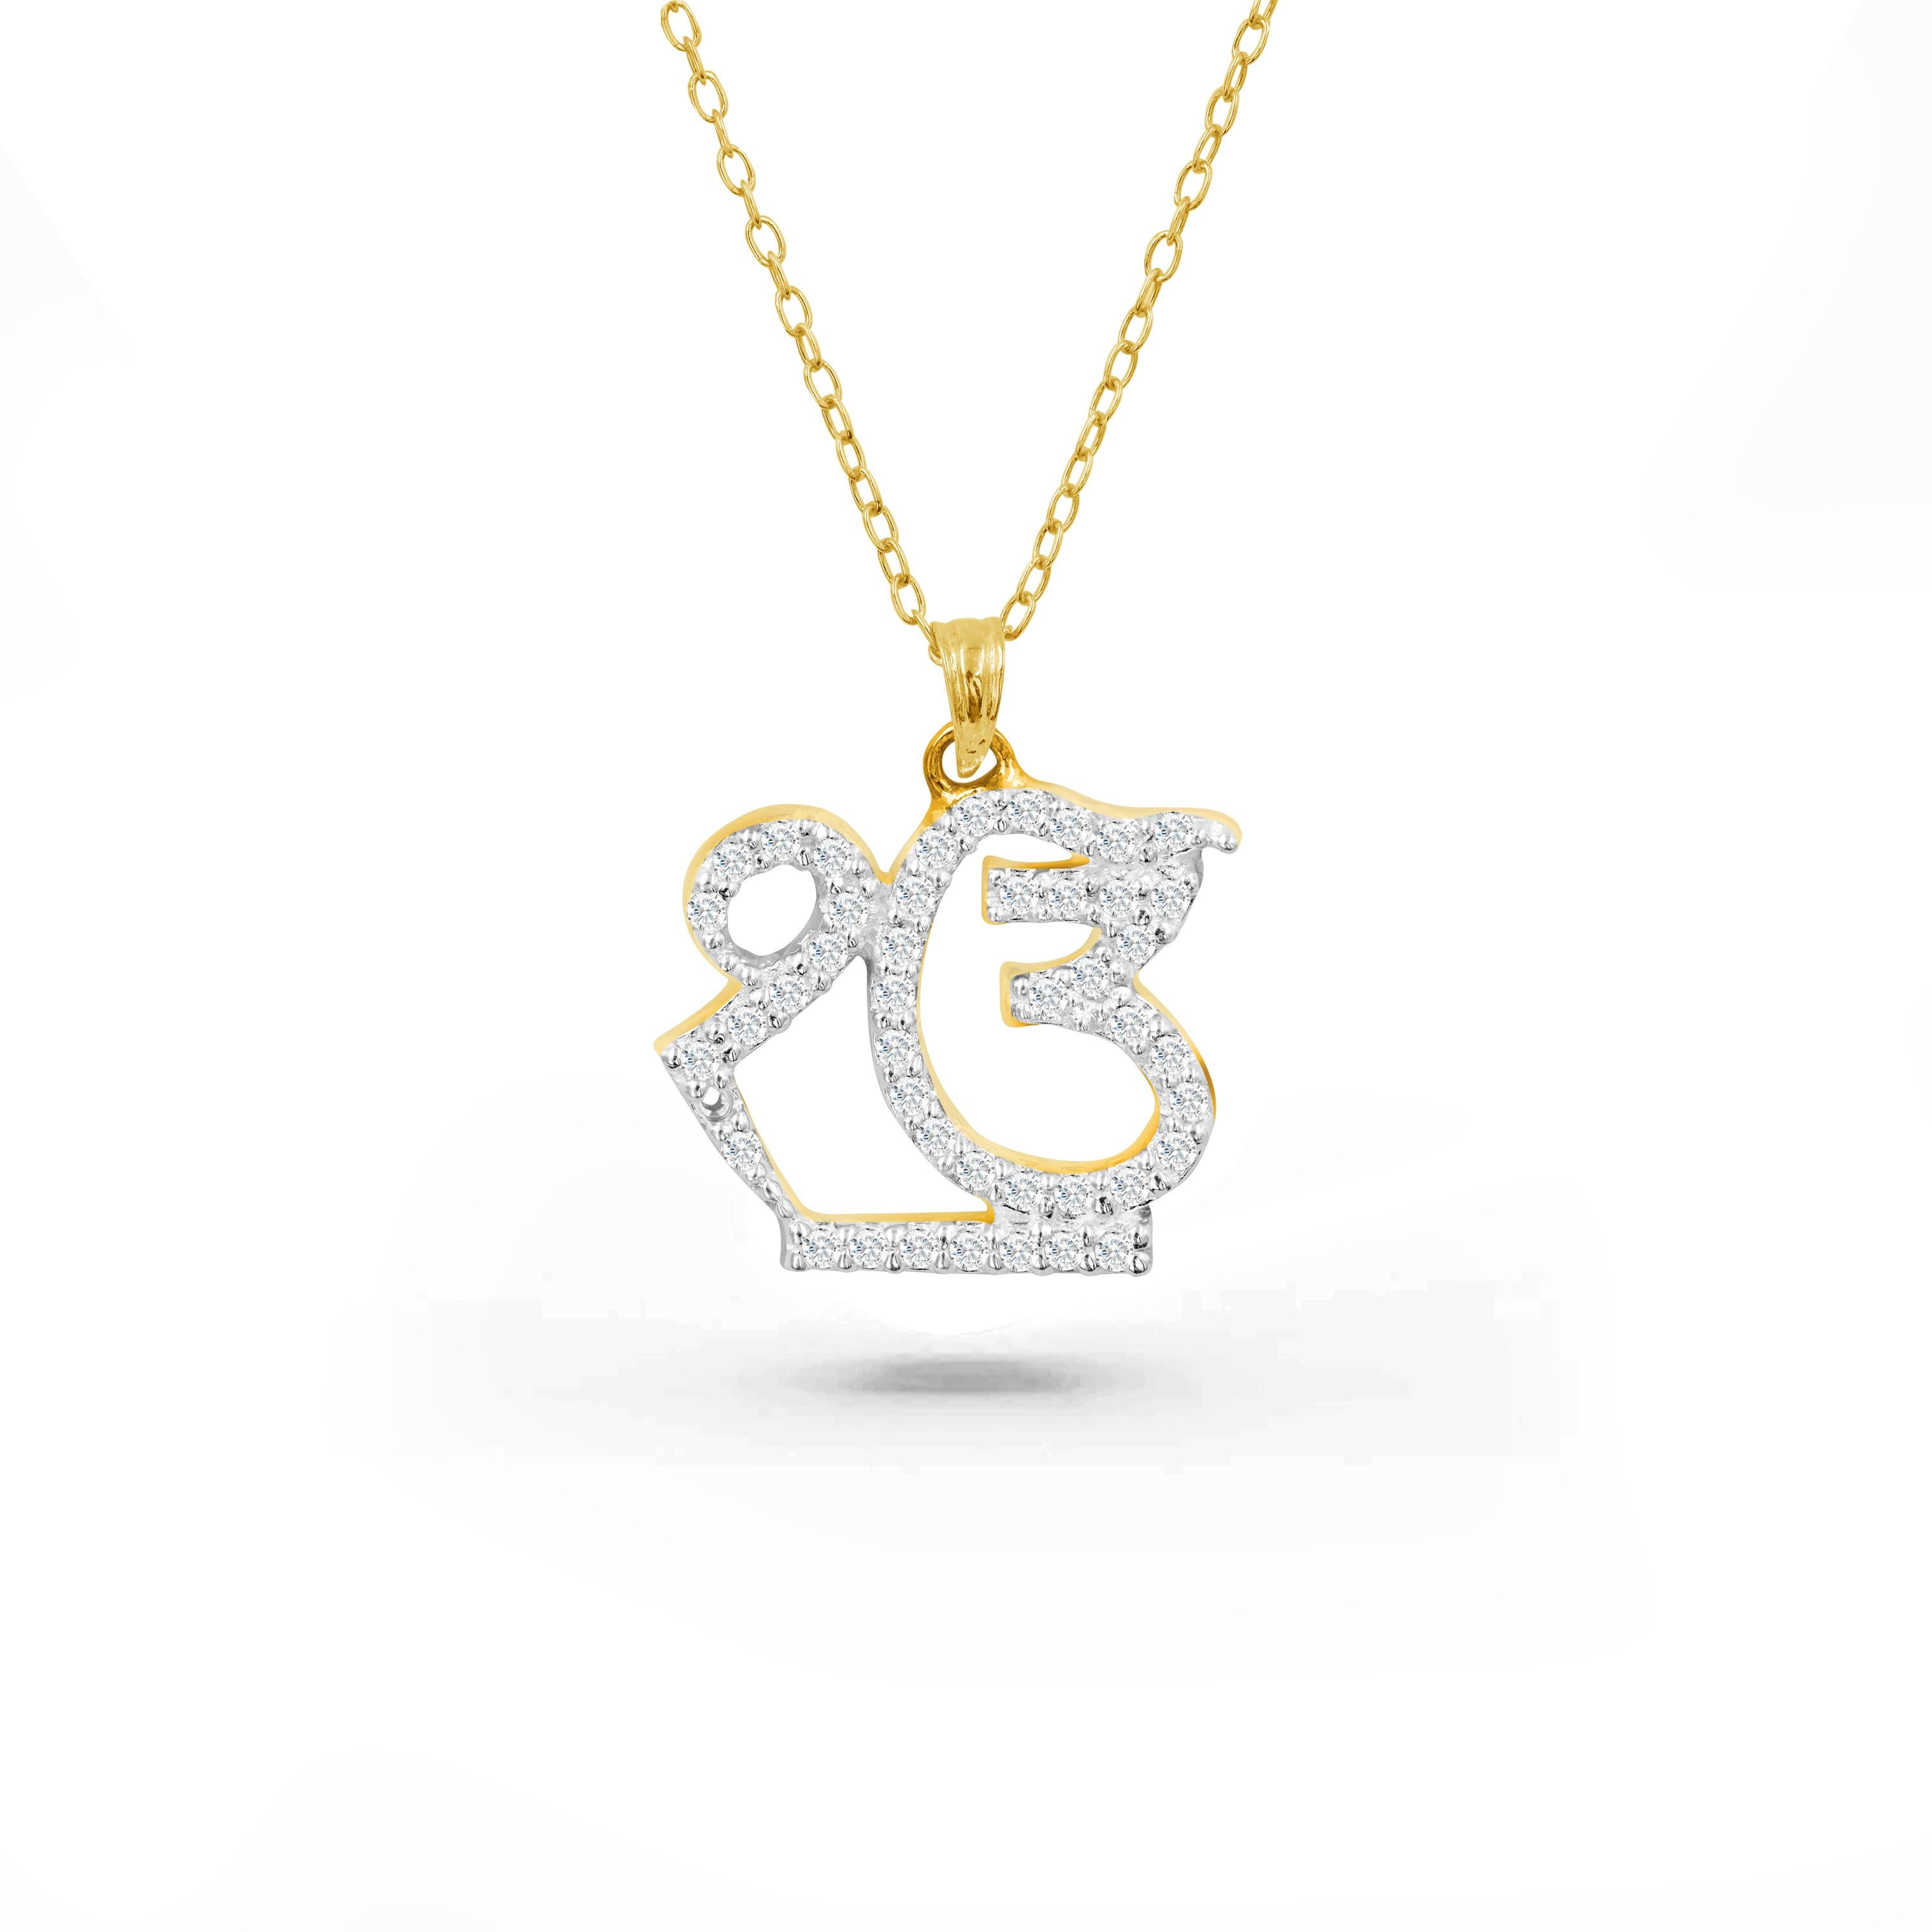 Handcrafted Ik Onkar diamond necklace is a perfect everyday wear necklace to bring inner peace and spirituality. This beautiful sikhism religious necklace is a statement piece. This sikhism necklace can be customized on the gold color and gold karat